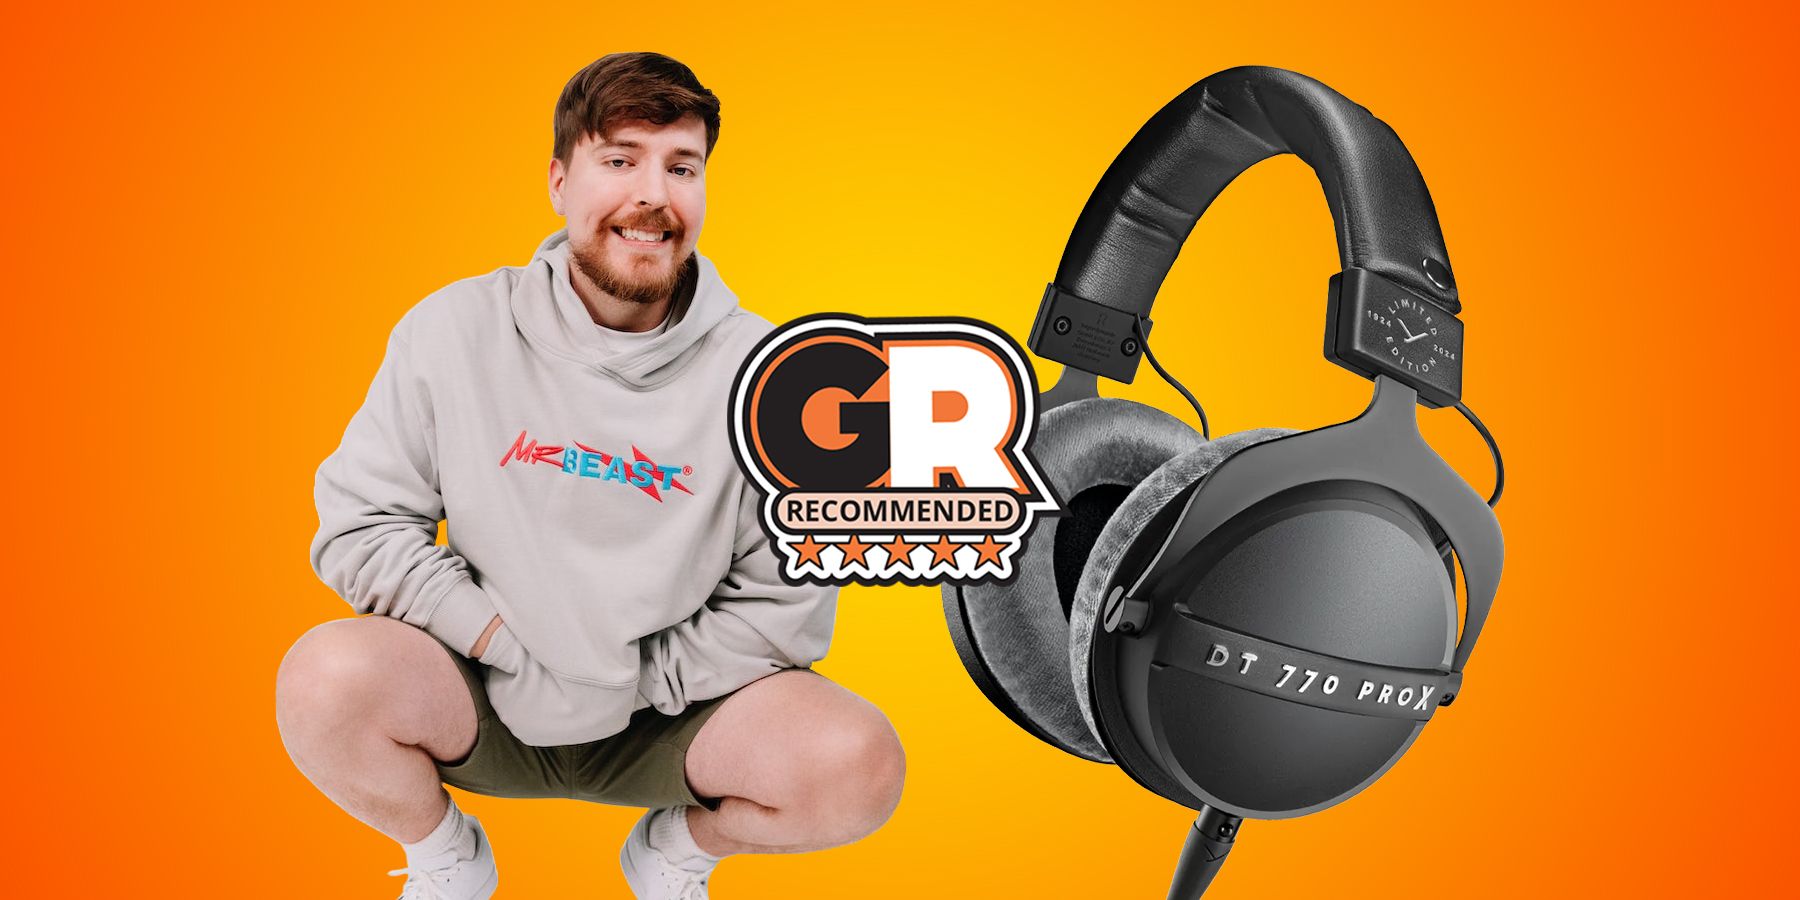 What Gaming Headset Does MrBeast Use?